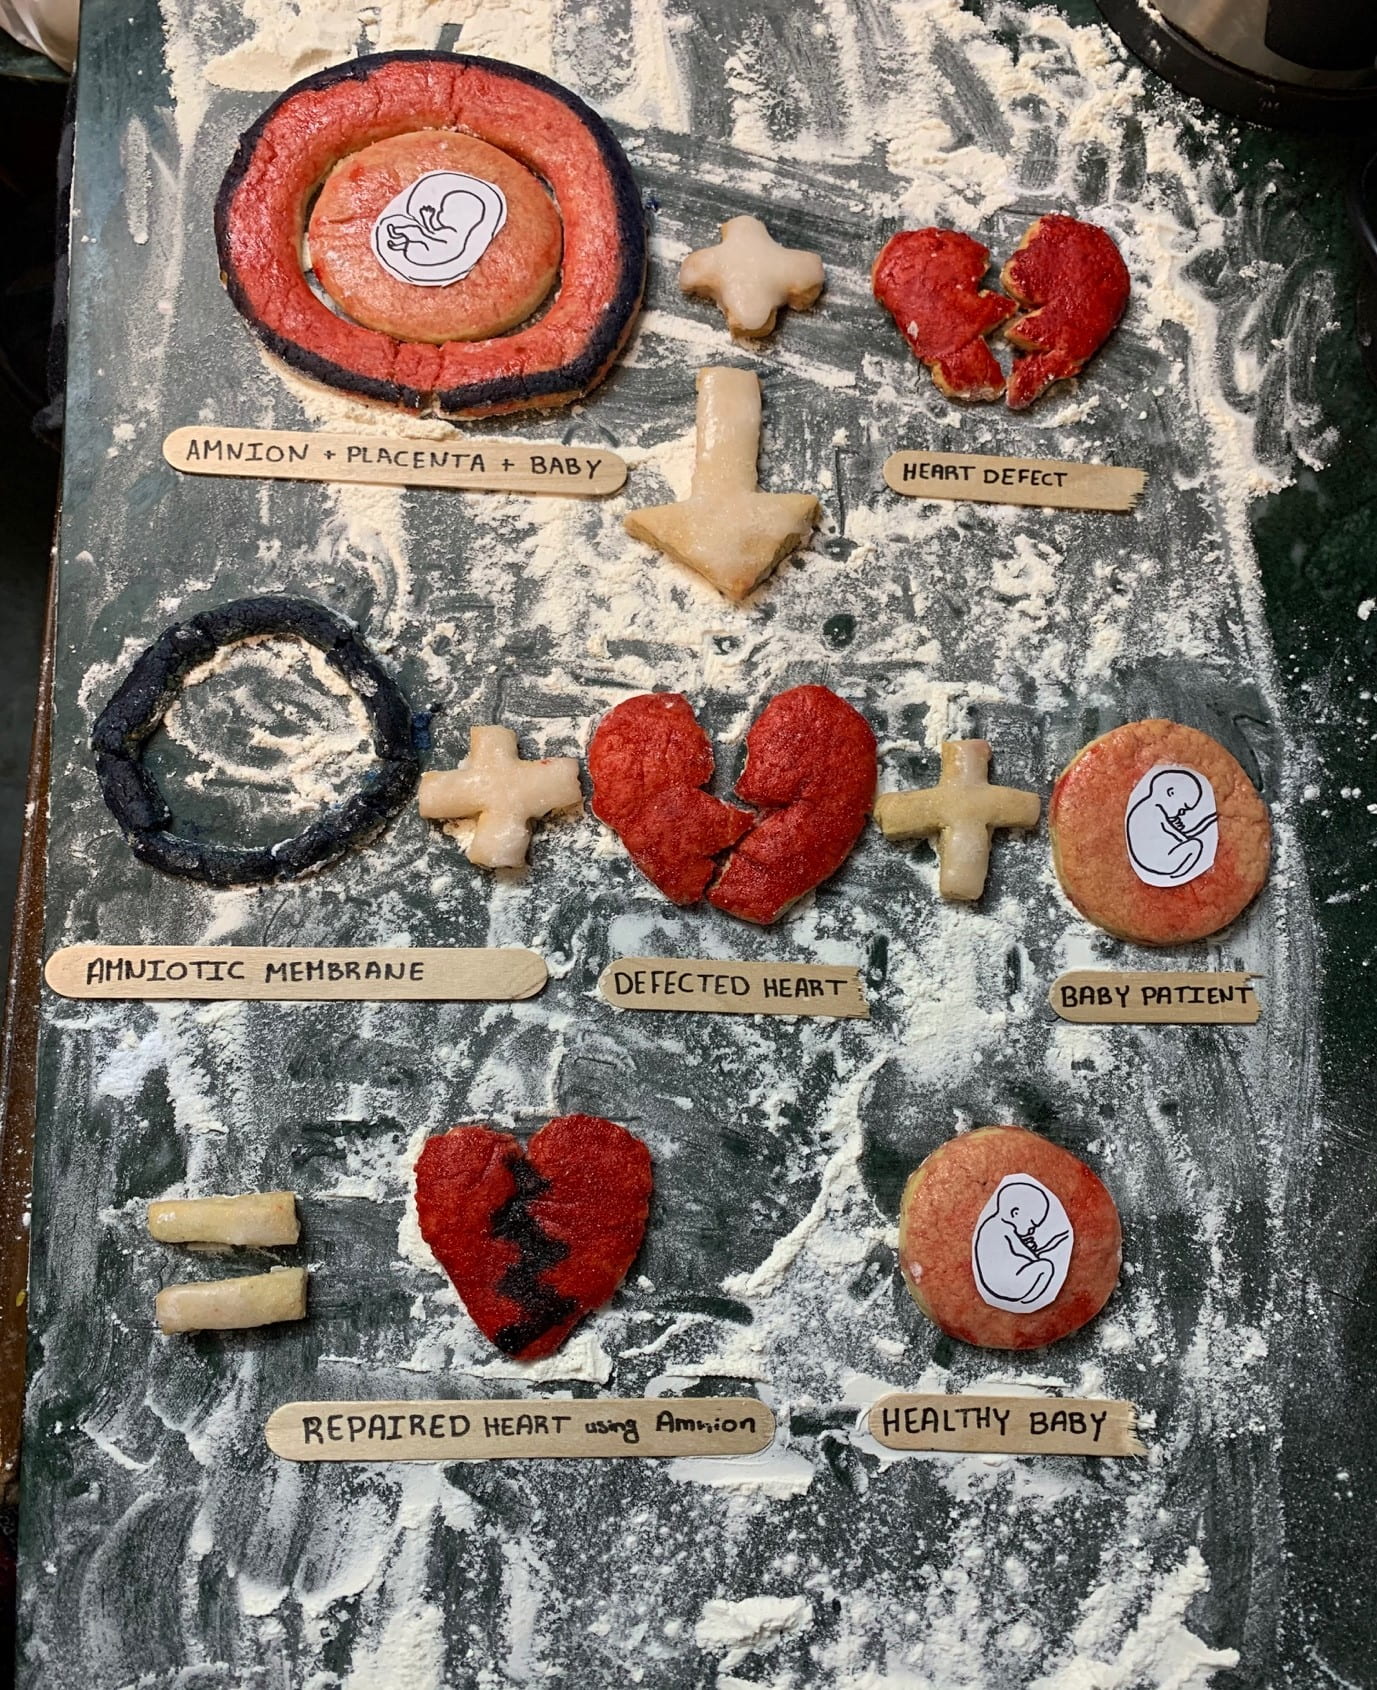 Three rows of baked cookies on a flour-covered surface. Top row: a cookie labelled 'amnion + placenta + baby'; a cookie labelled 'heart defect'. Middle row: a cookie labelled 'amniotic membrane'; a cookie labelled 'defective heart'; a cookie labelled 'baby patient'. Bottom row: a cookie labelled 'repaired heart using amnion; a cookie labelled 'healthy baby'.